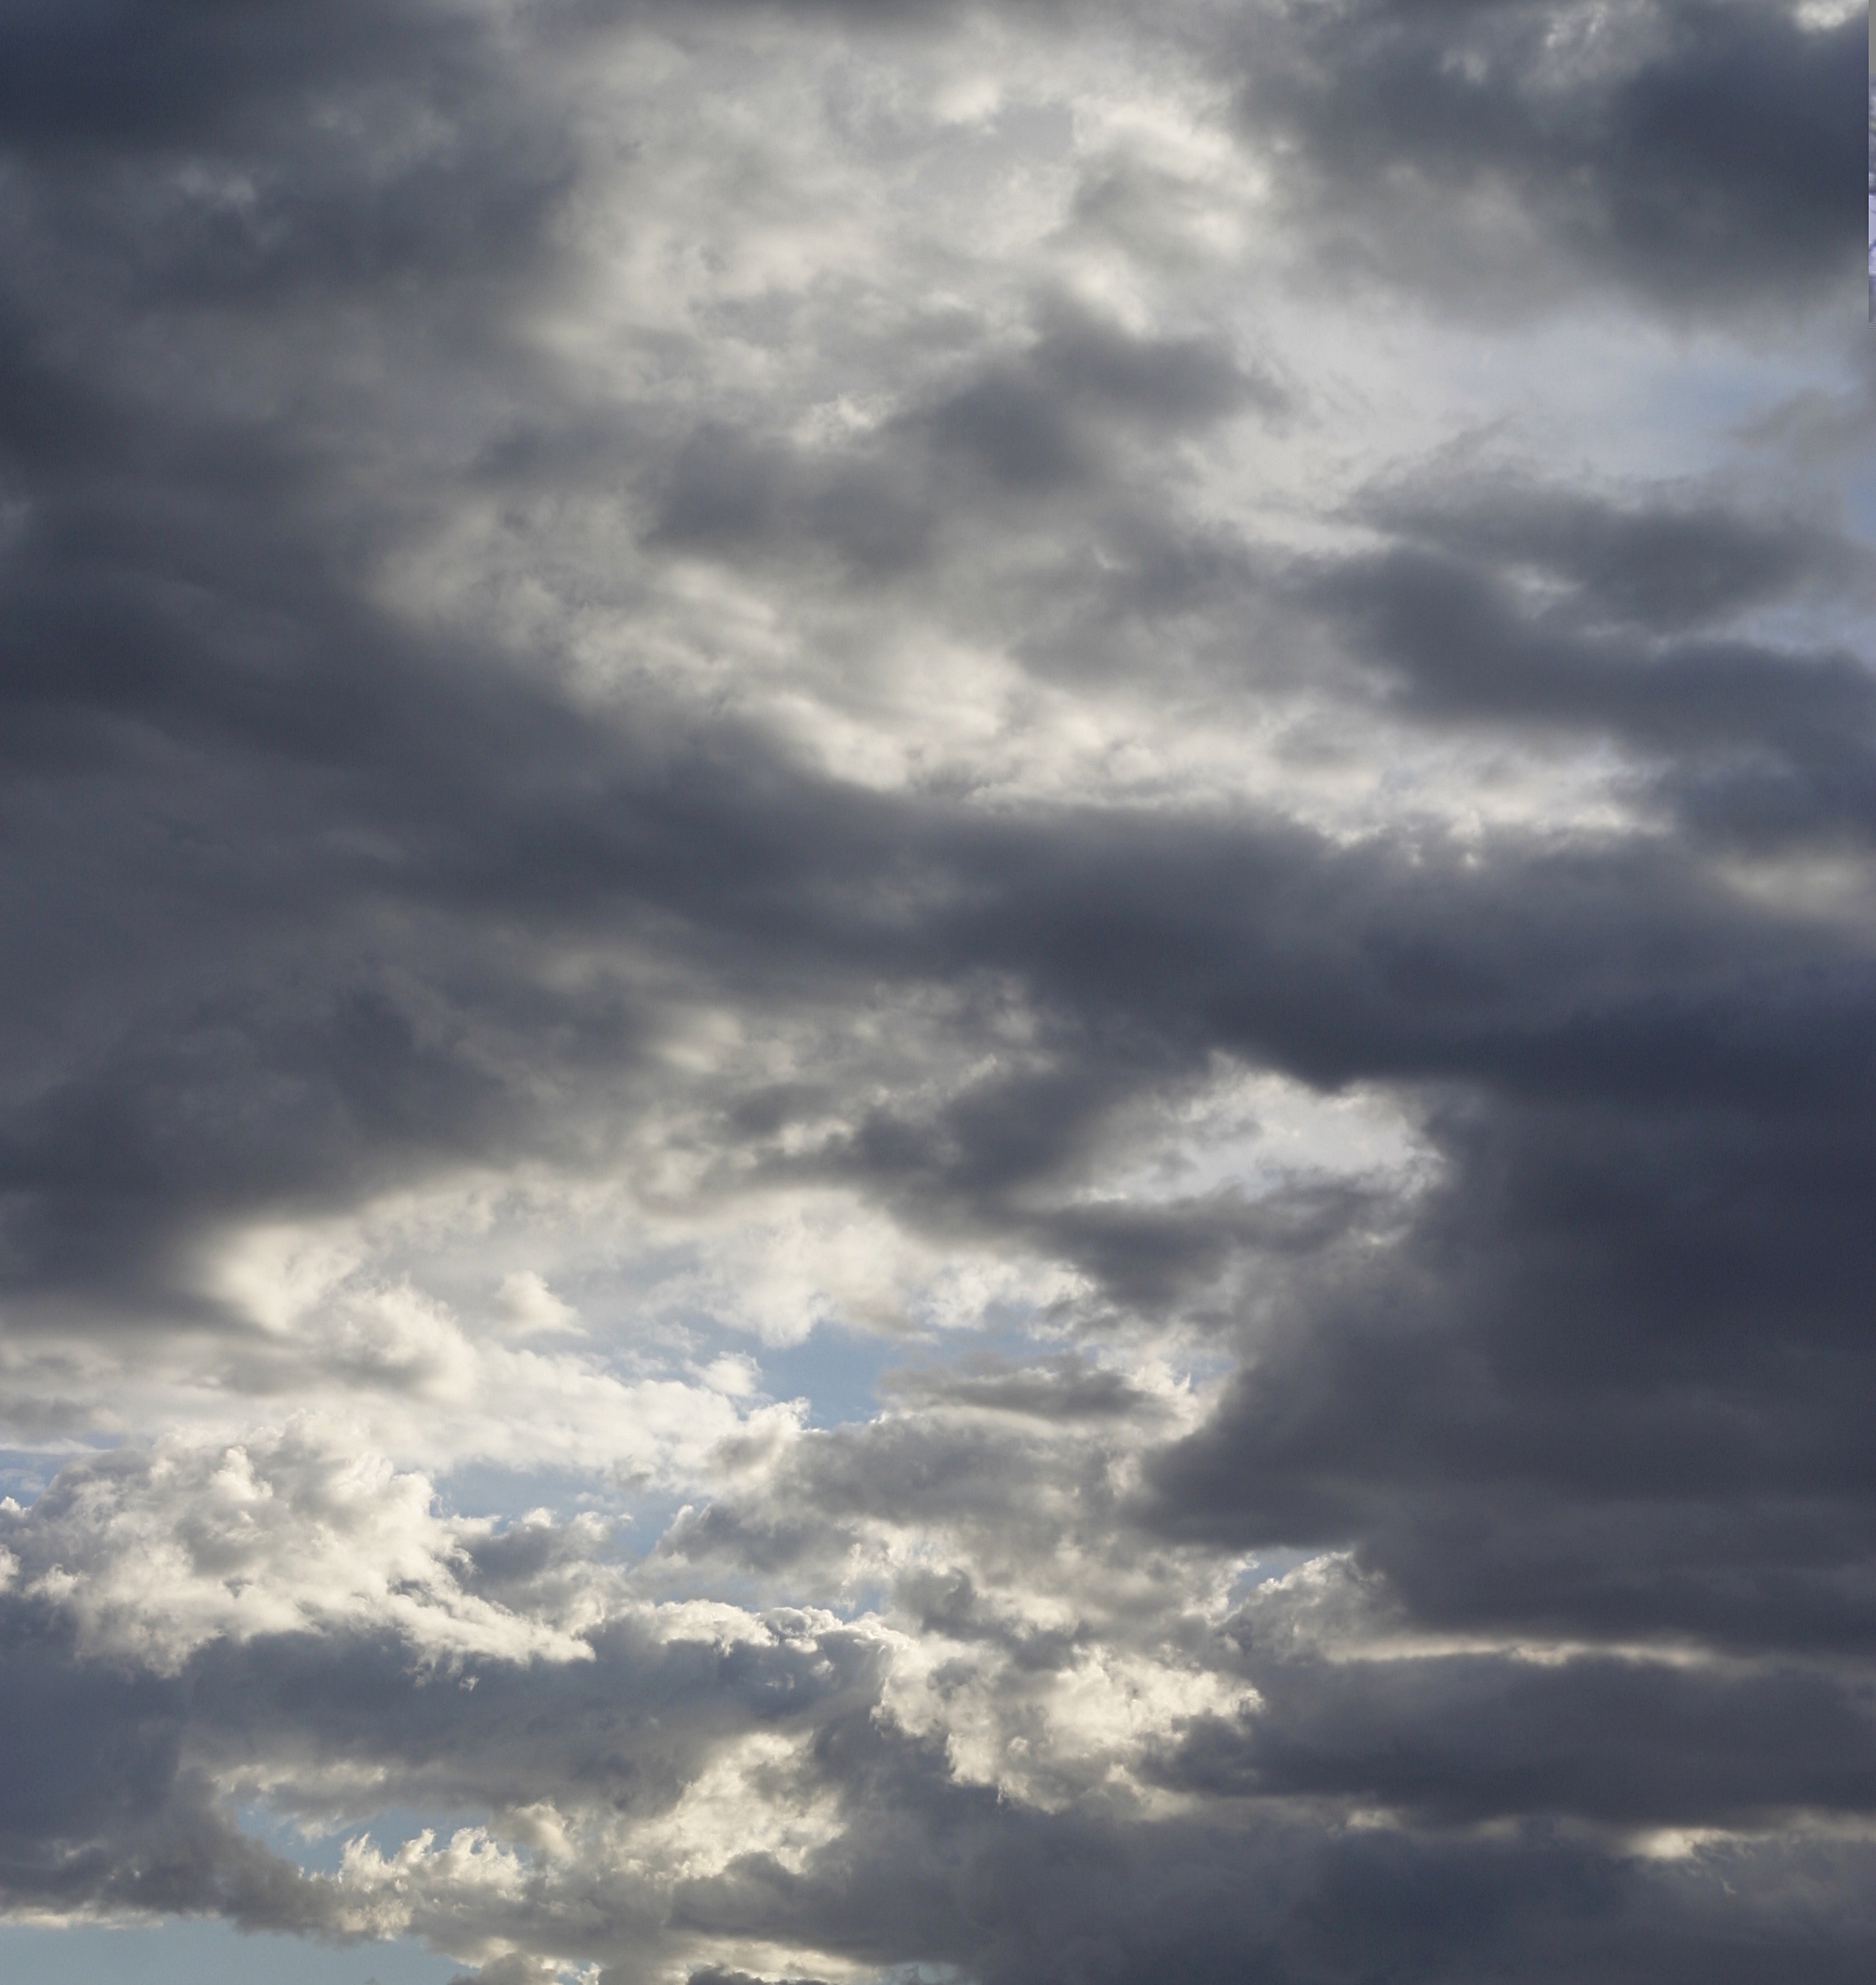 Gray Cloudy Sky: The scattering of sunlight at the cloud's upper reaches and margins, Skies. 2050x2170 HD Wallpaper.